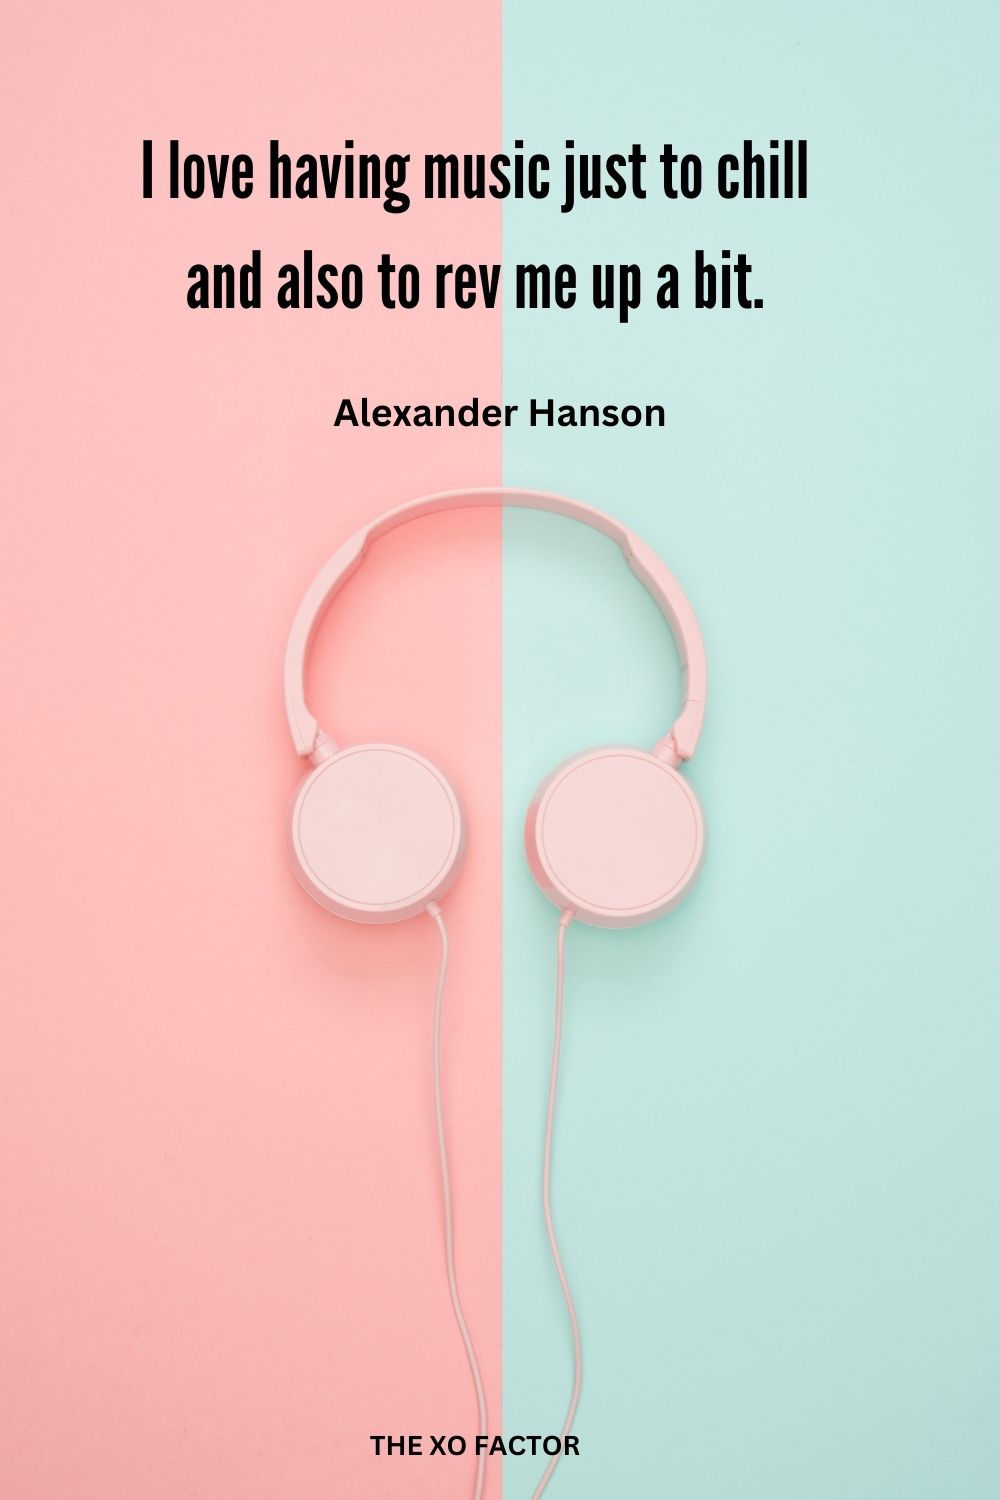 I love having music just to chill and also to rev me up a bit.
Alexander Hanson